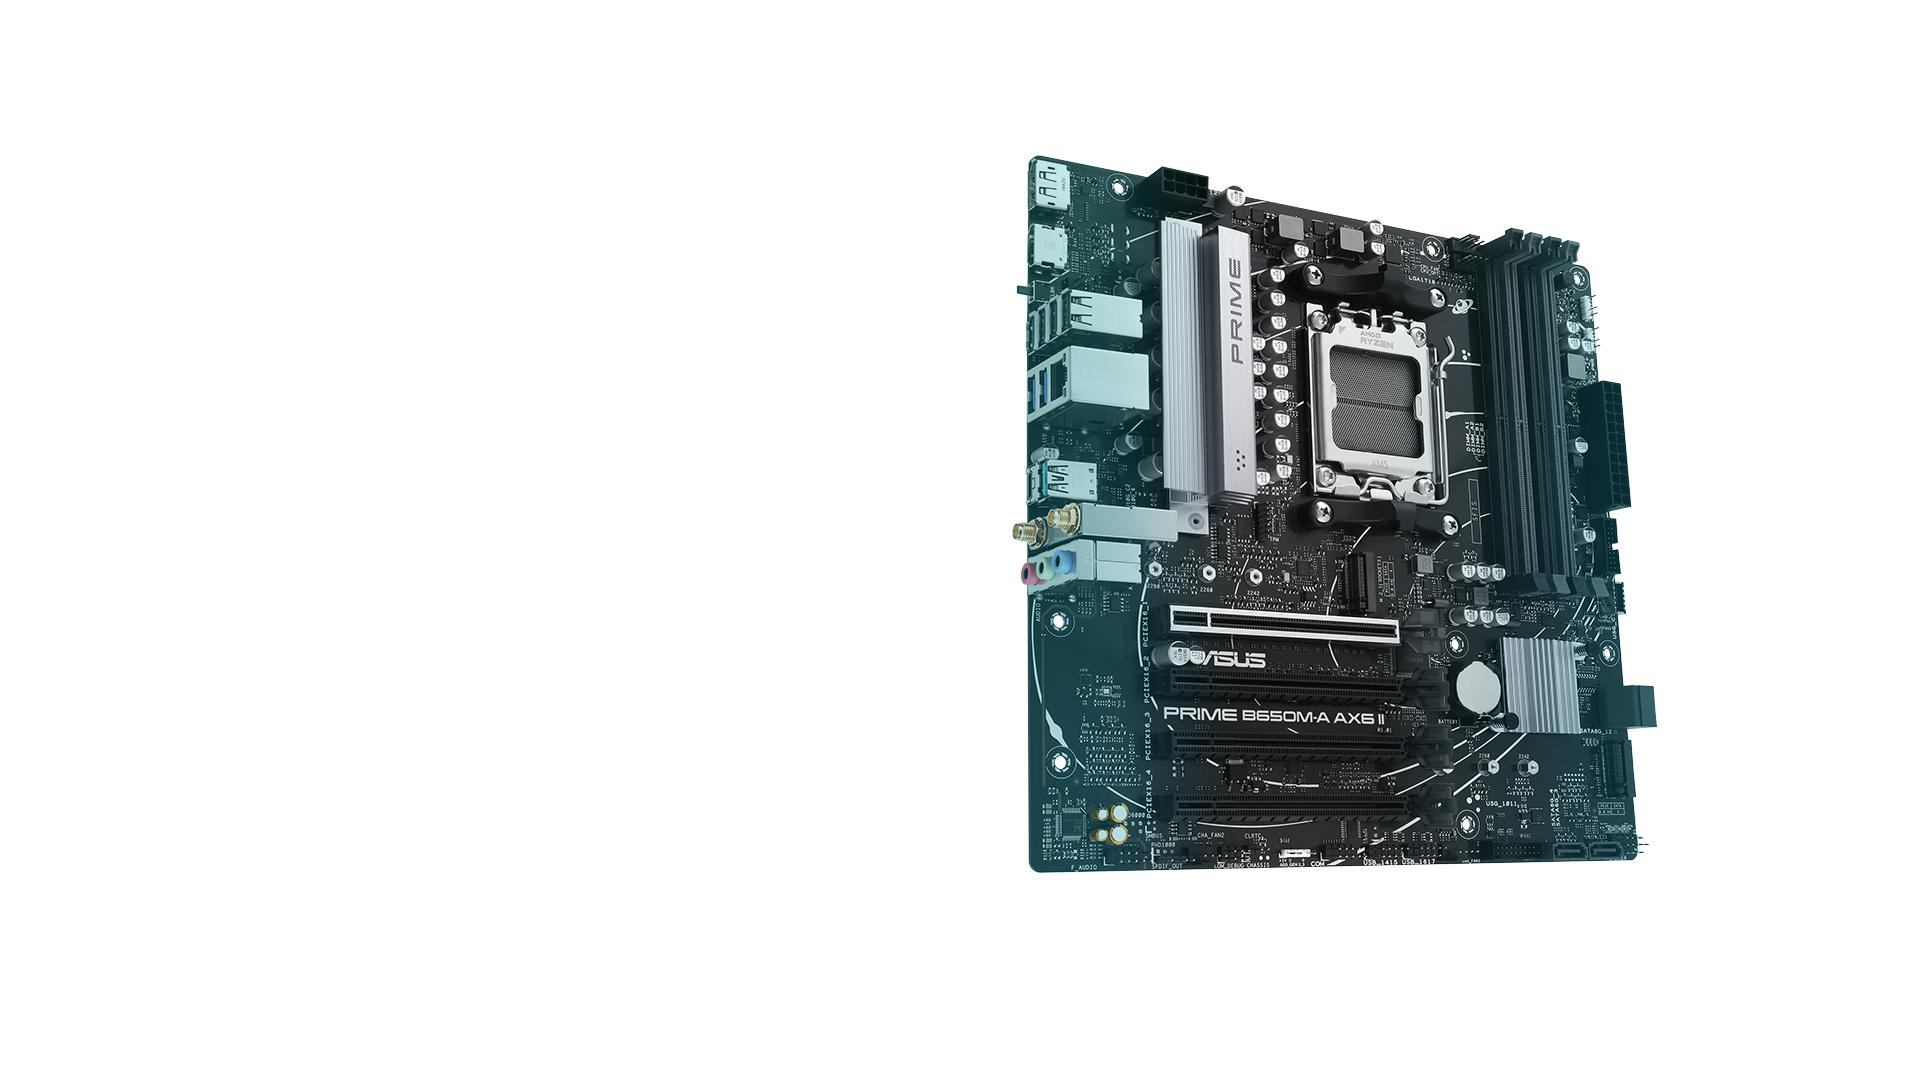 Prime series motherboard provides users and PC DIY builders a range of performance tuning options via intuitive software and firmware features.